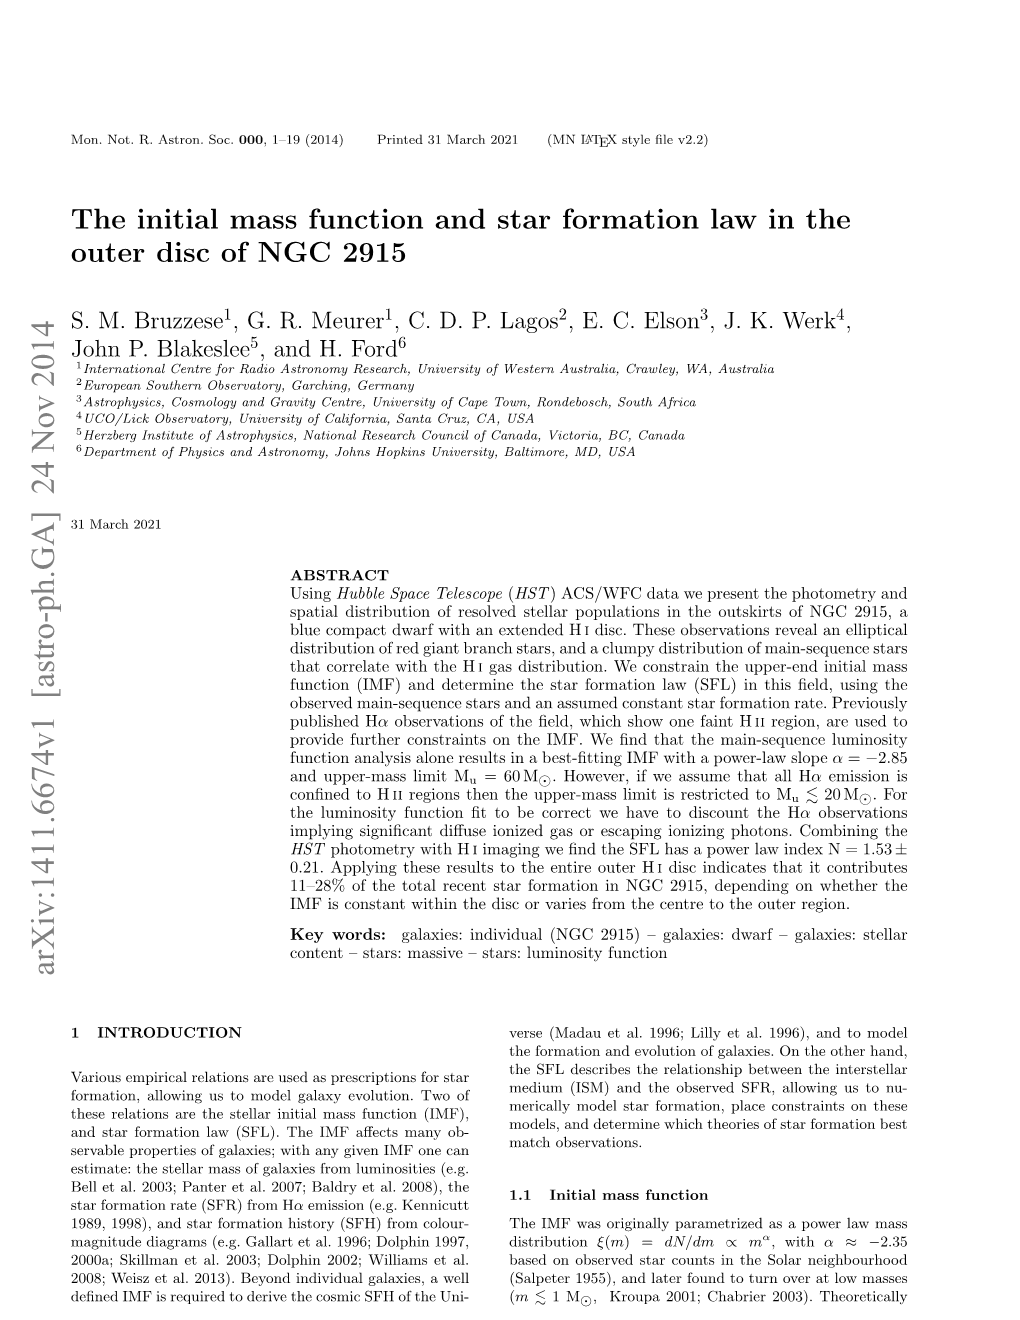 The Initial Mass Function and Star Formation Law in the Outer Disc of NGC 2915